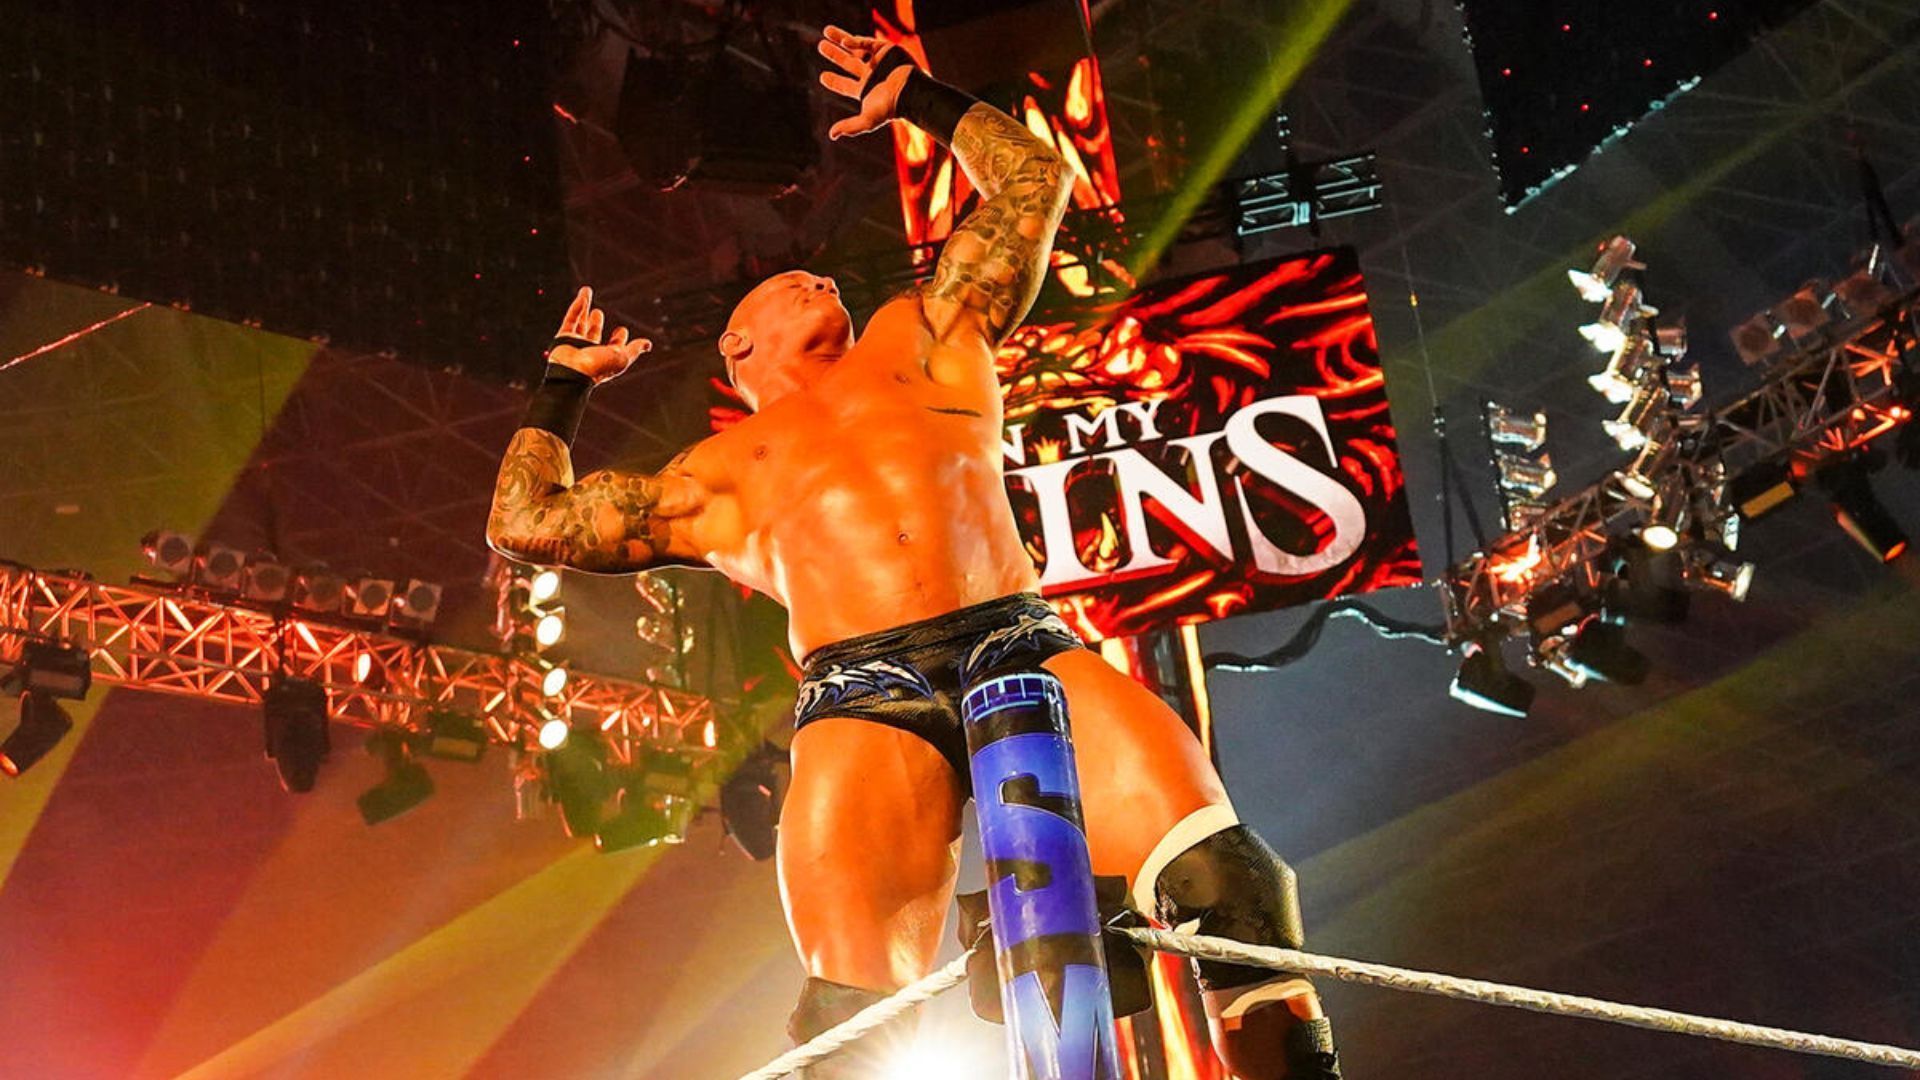 Randy Orton had an incredible match against Gunther